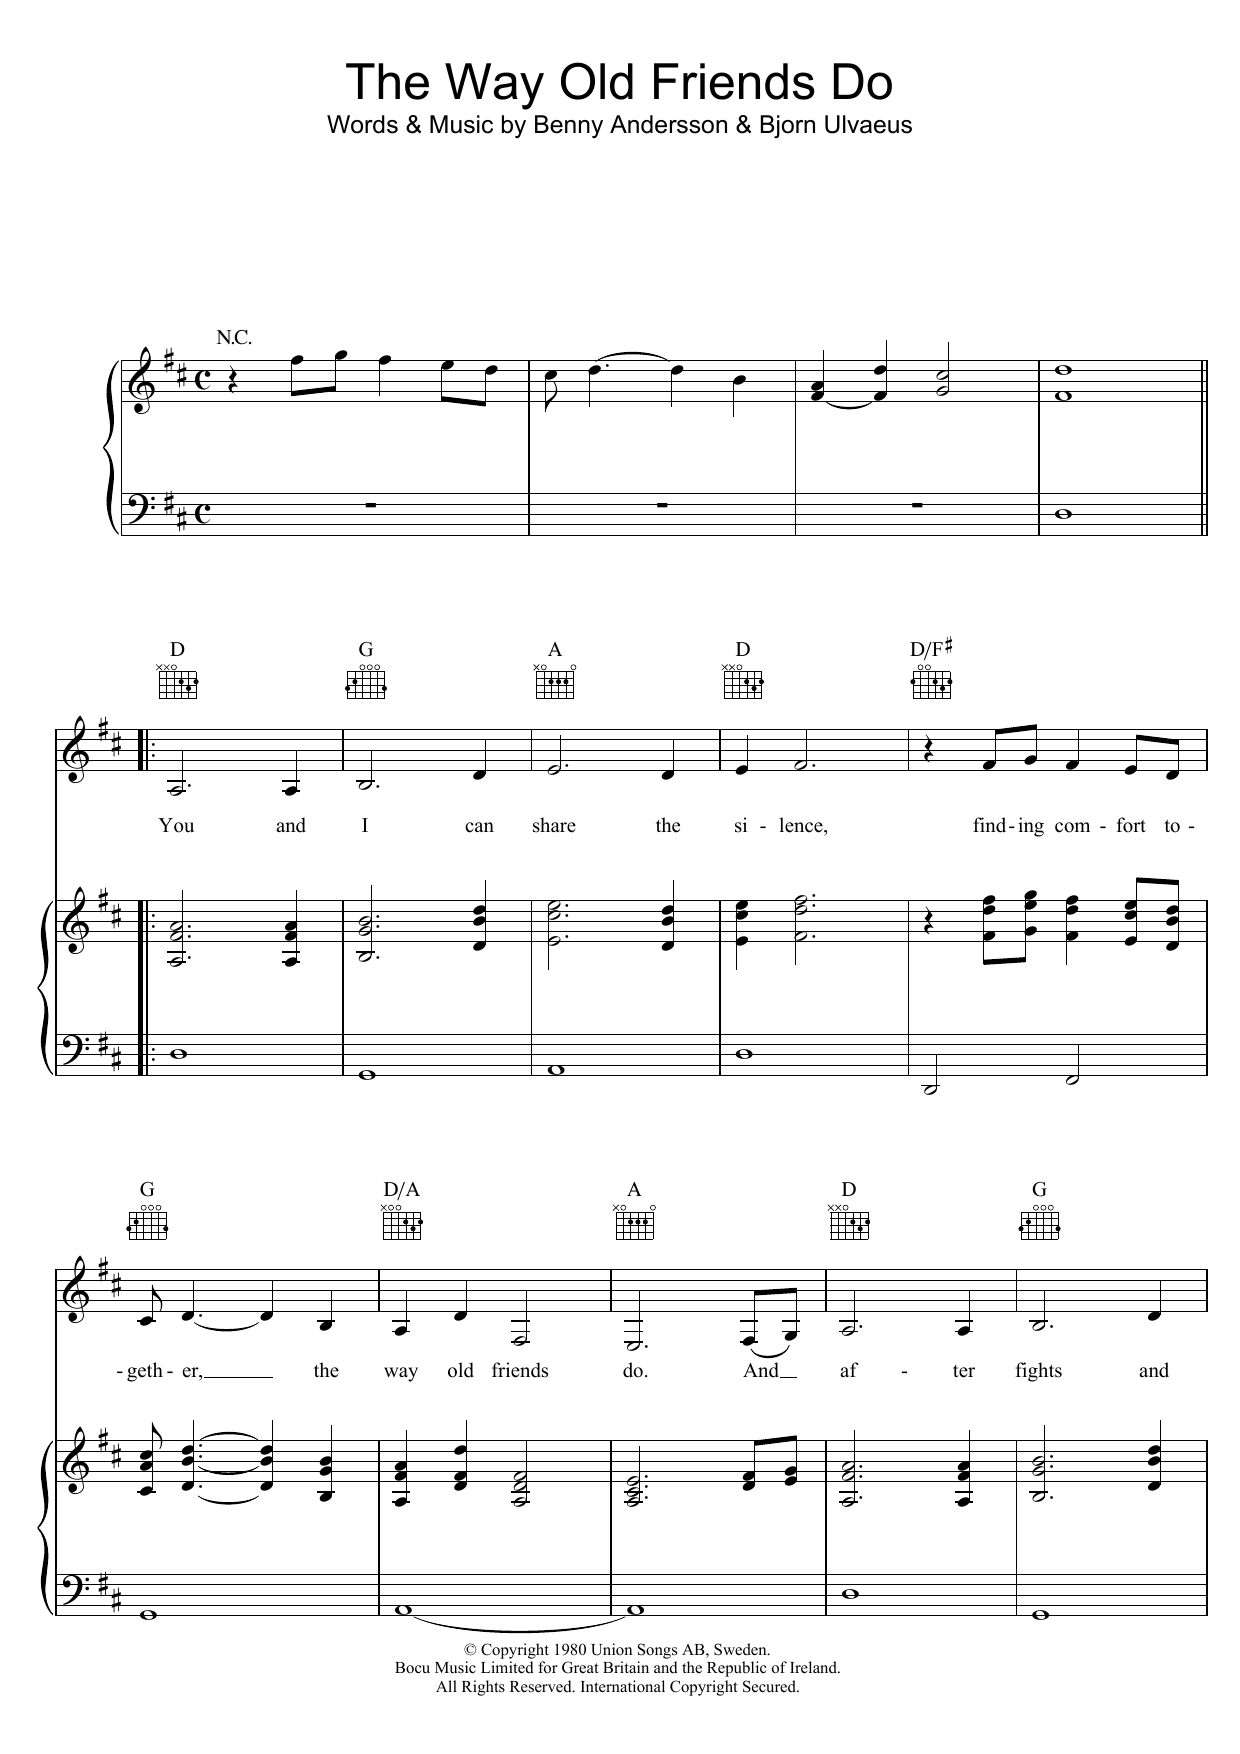 Download ABBA The Way Old Friends Do Sheet Music